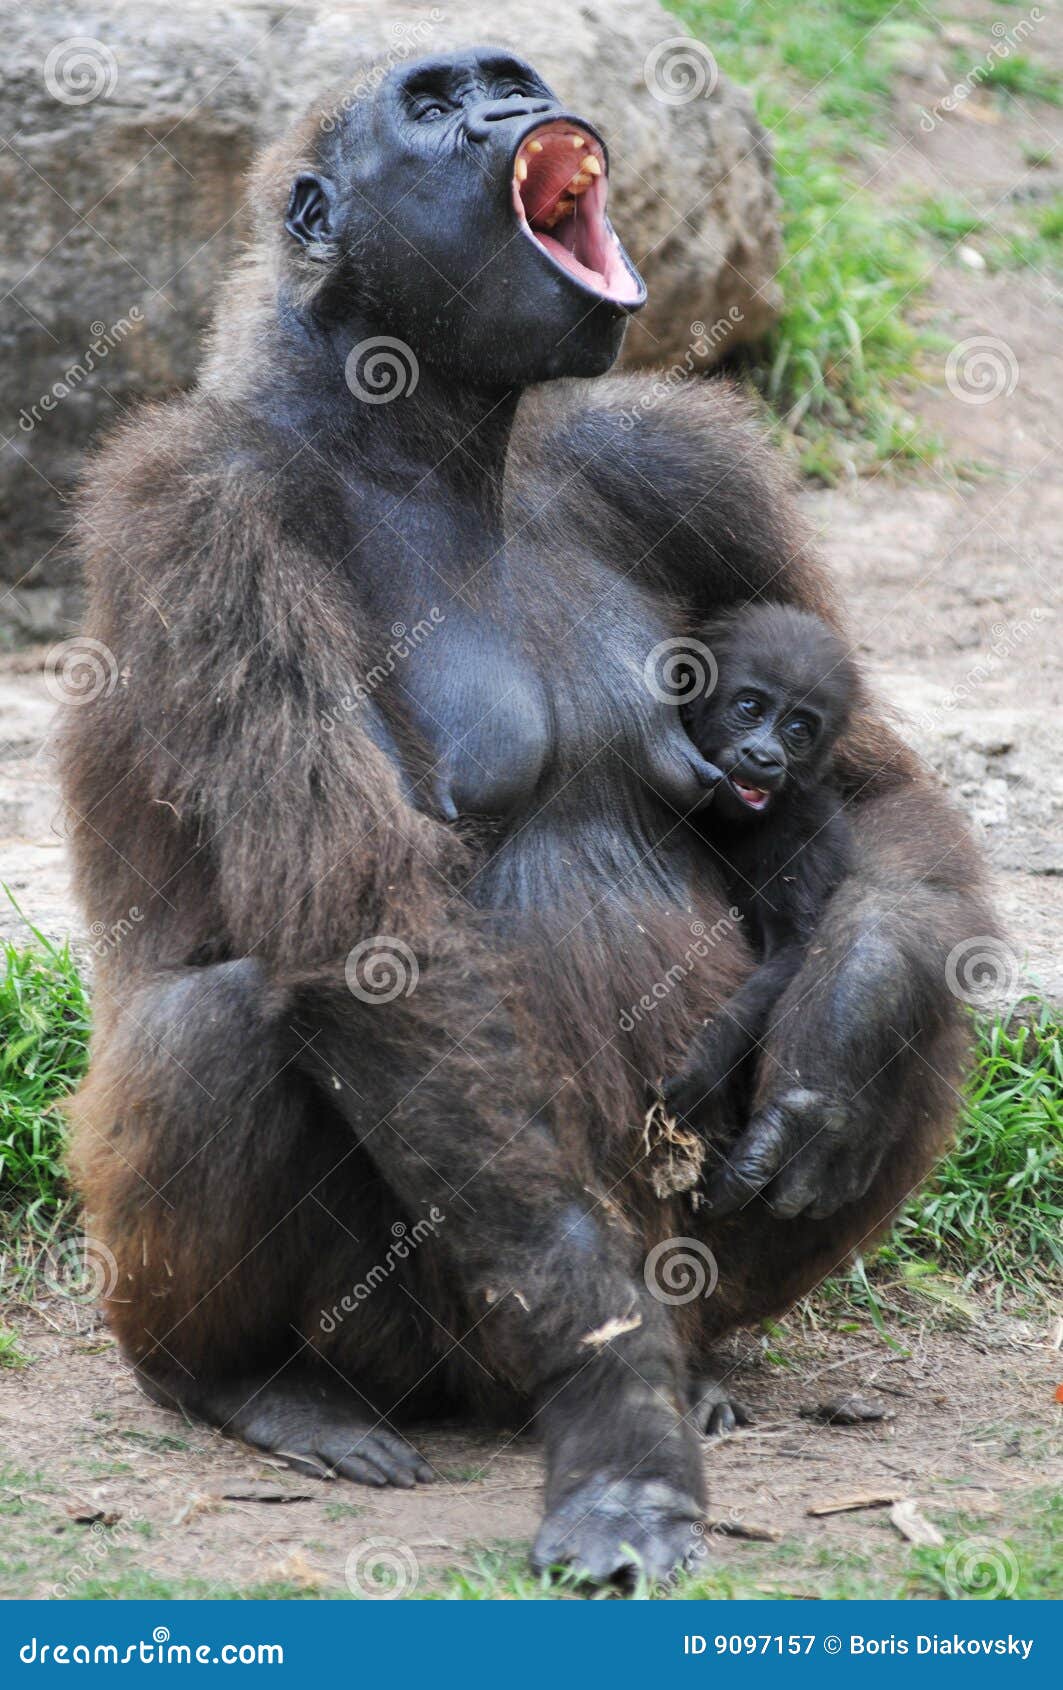 gorilla with a young offspring screaming